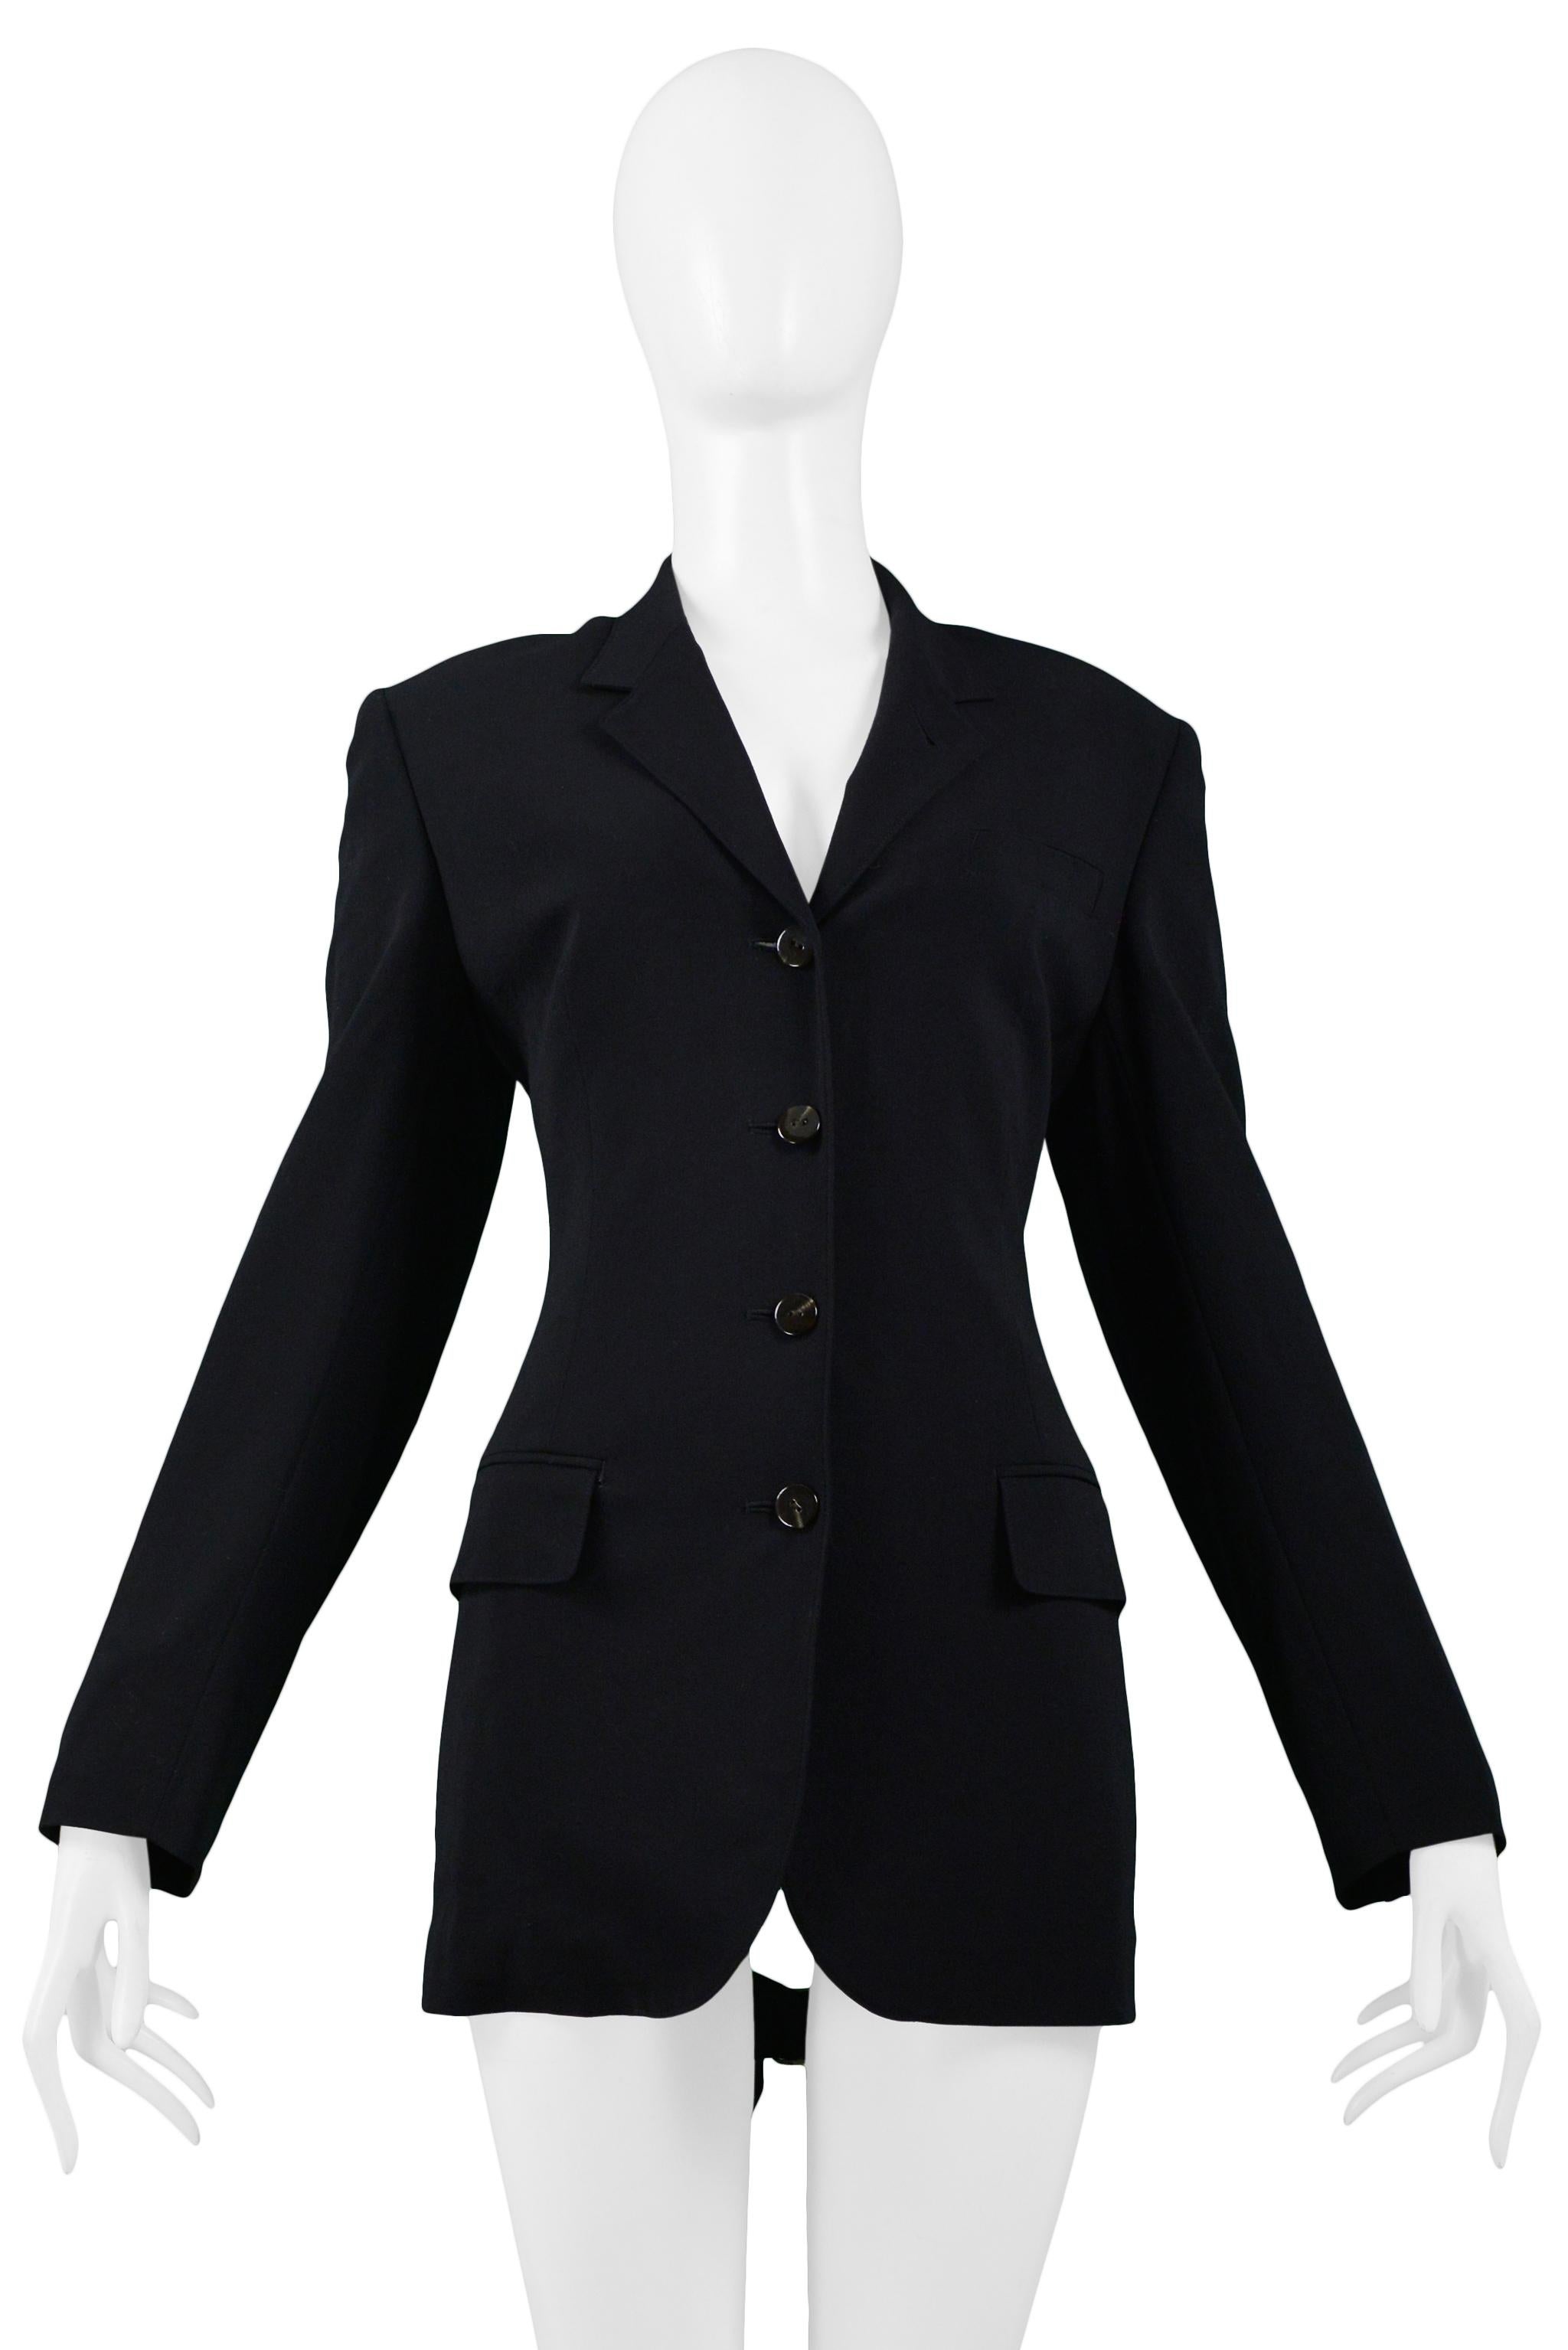 Resurrection Vintage is excited to offer a vintage Jean Paul Gaultier black blazer jacket with fitted three-button front, front side flap pockets, a cutout back panel featuring five buckle straps with silver hardware. Circa the 1990s. 

Jean Paul